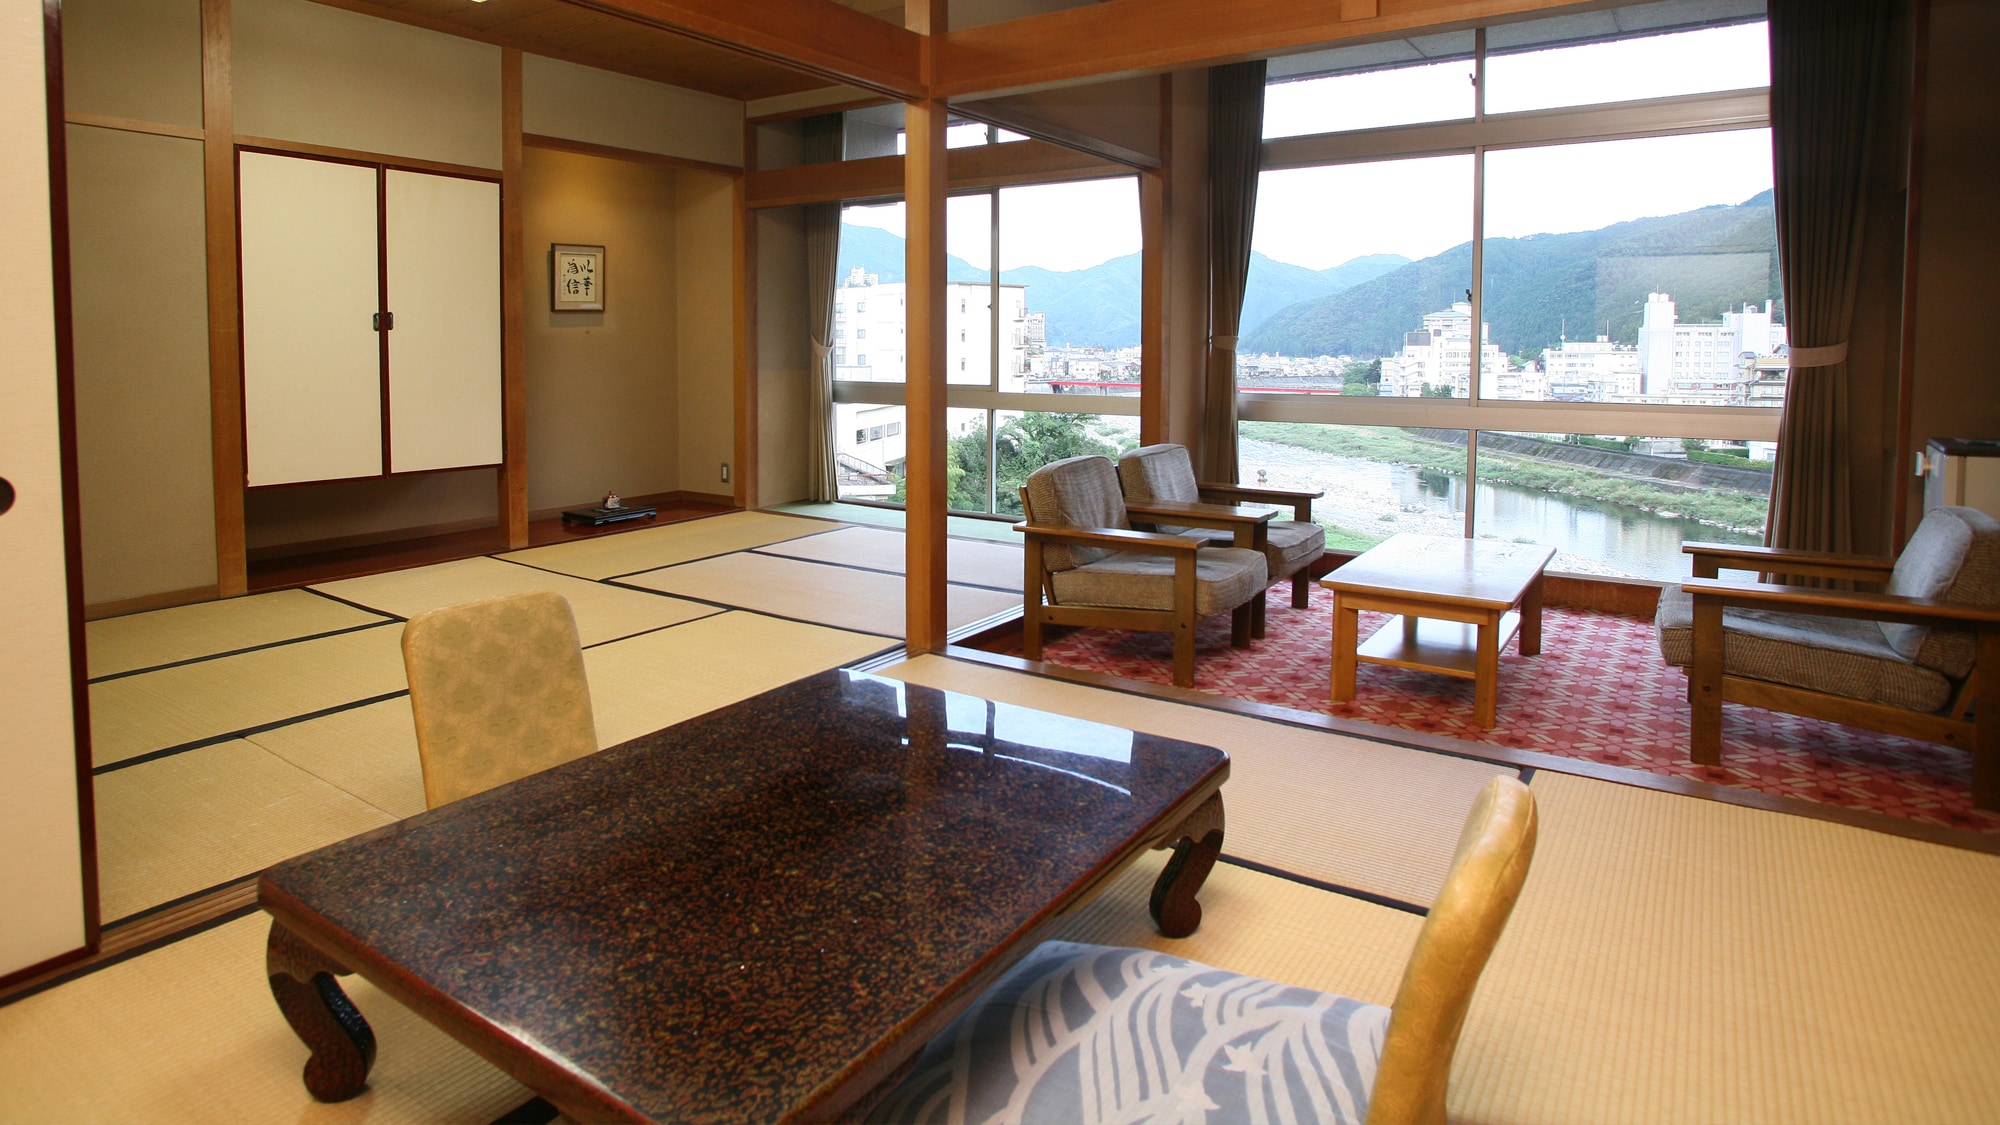 An example of a Japanese-style room with 15 tatami mats